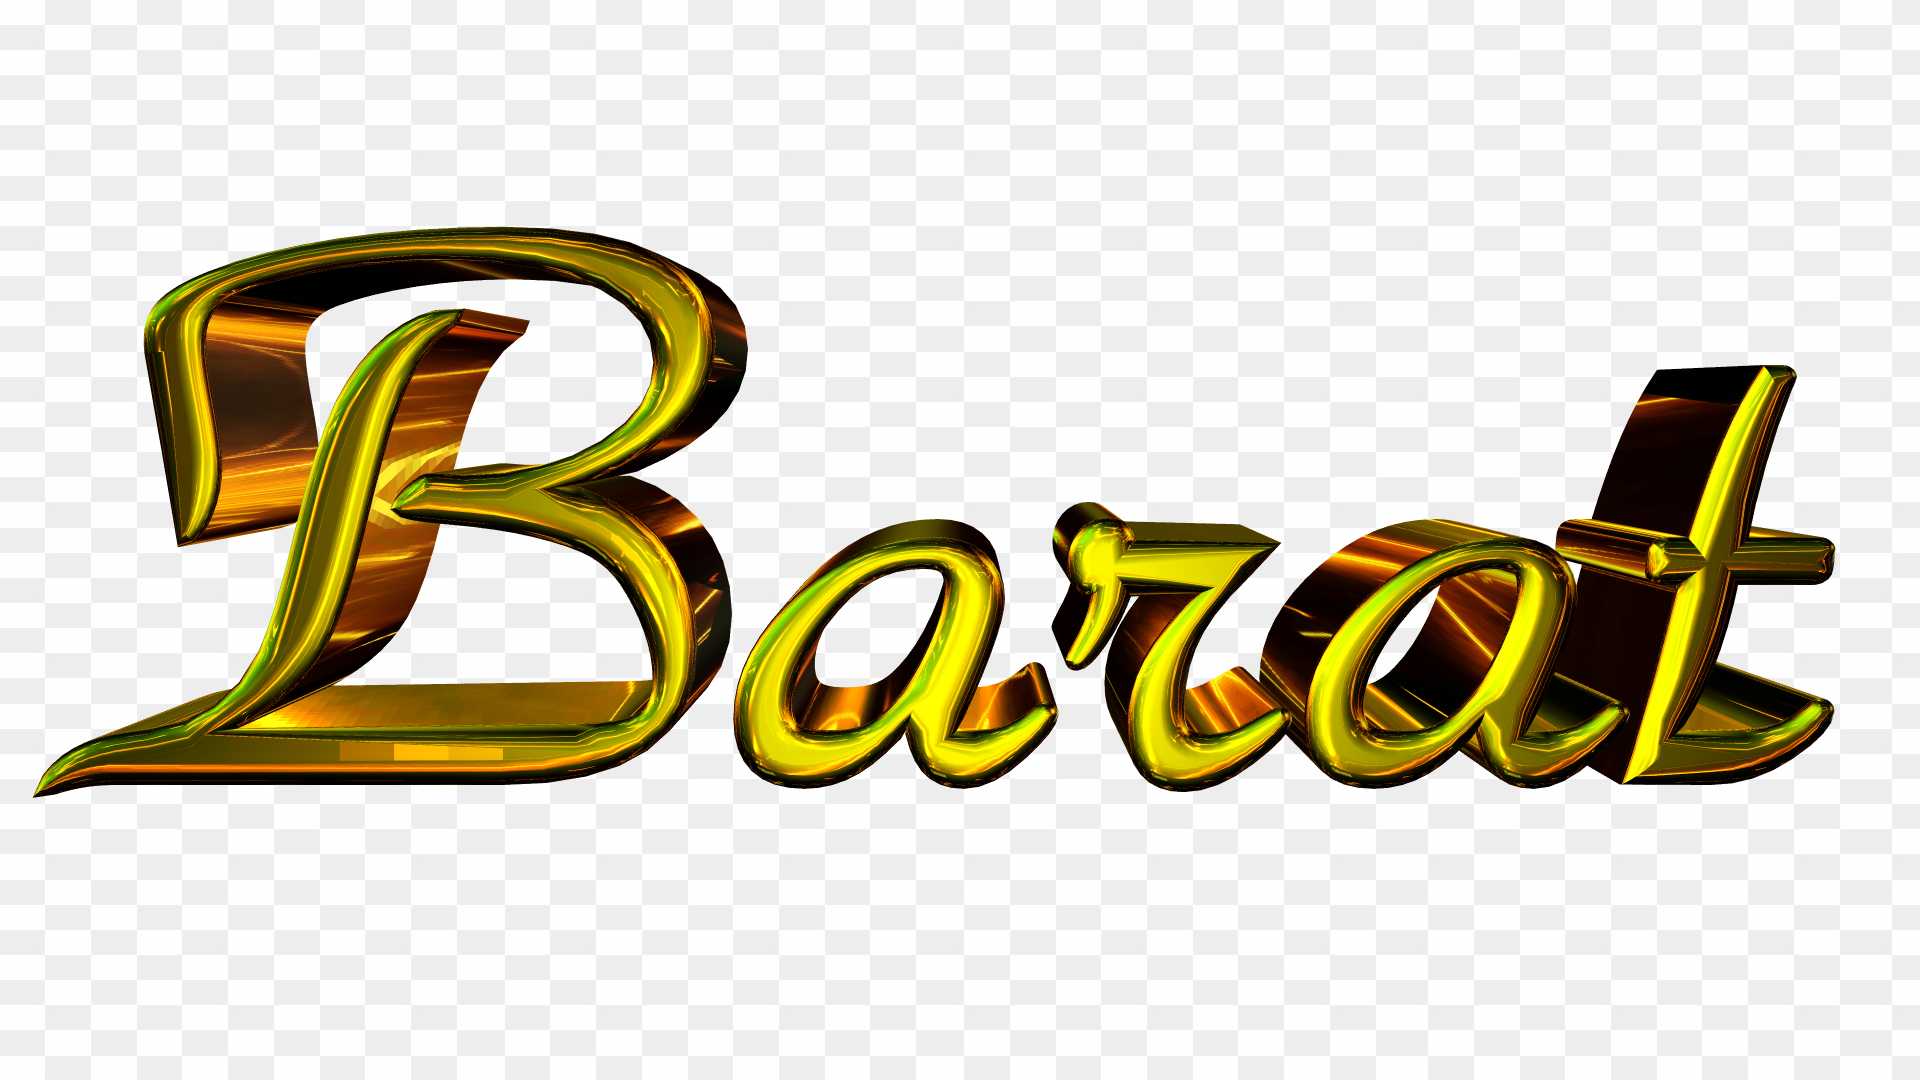 Barat text PNG images, wedding PNG images download_ shaadi PNG